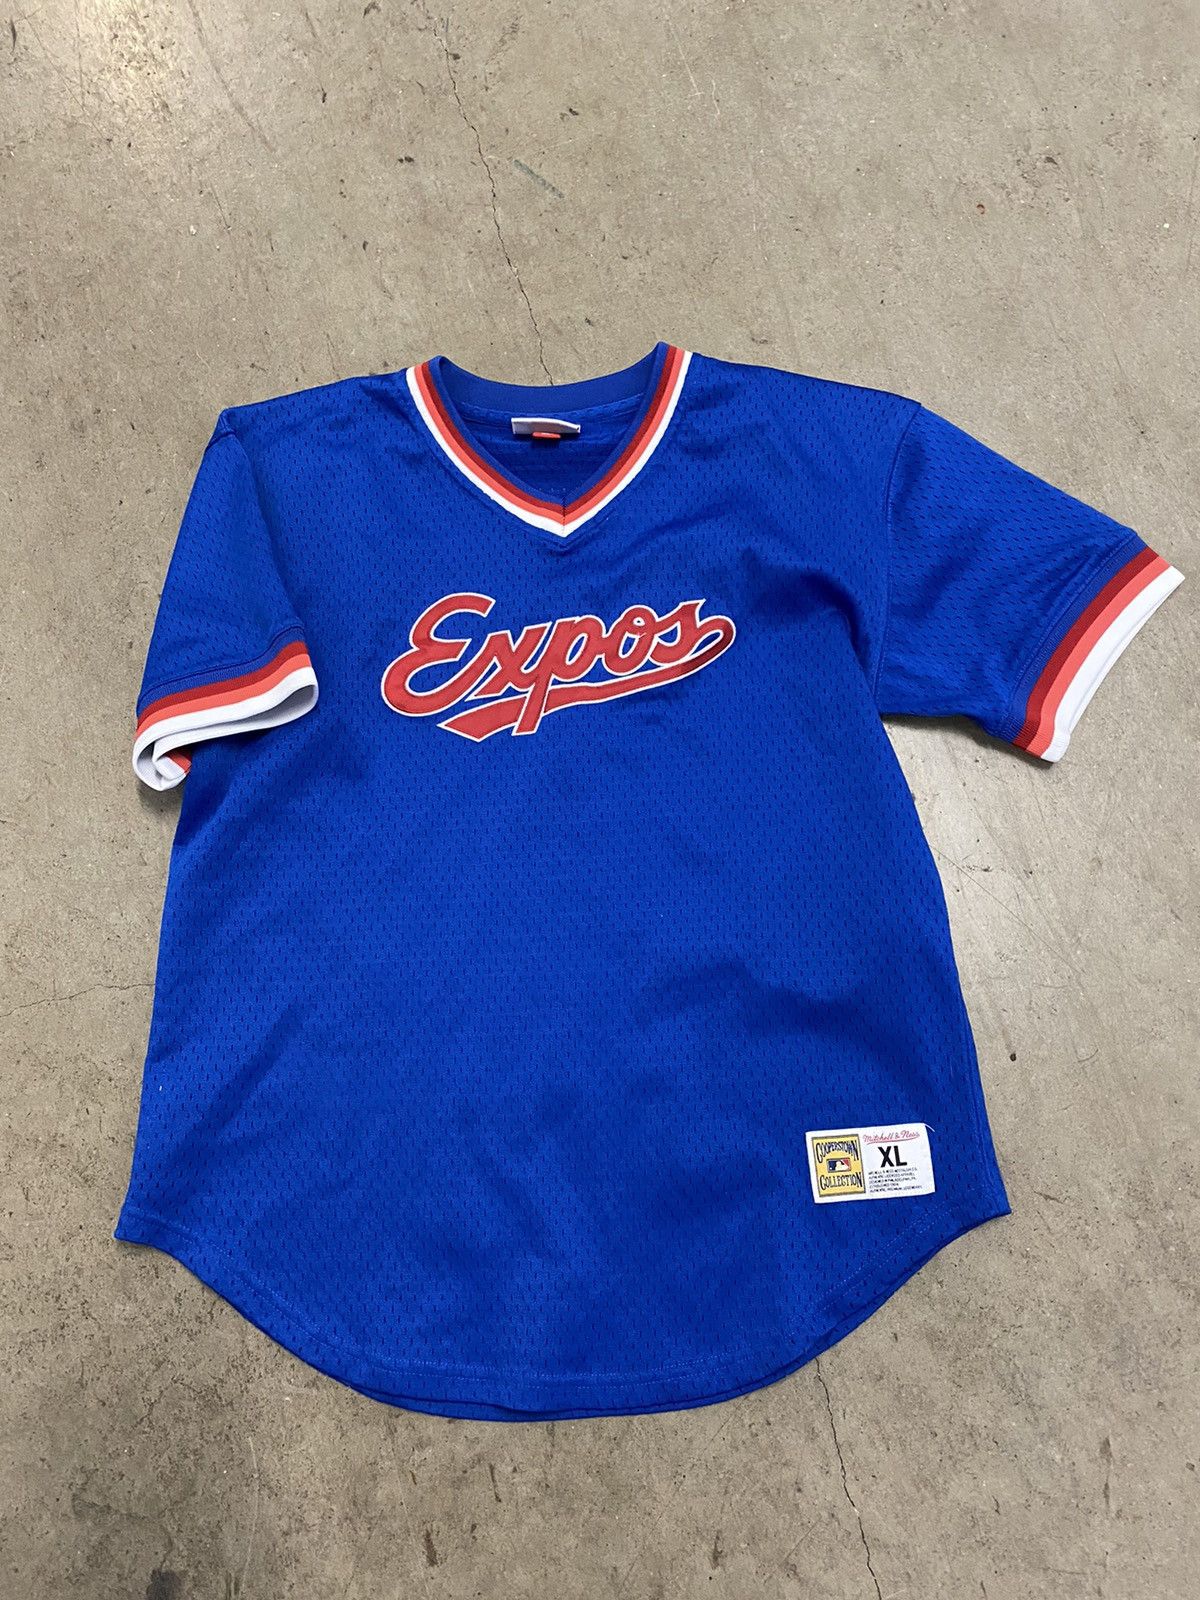 Vintage Mitchell and Ness Expos Jersey Nationals Kids XL Mens Small Size US S / EU 44-46 / 1 - 1 Preview